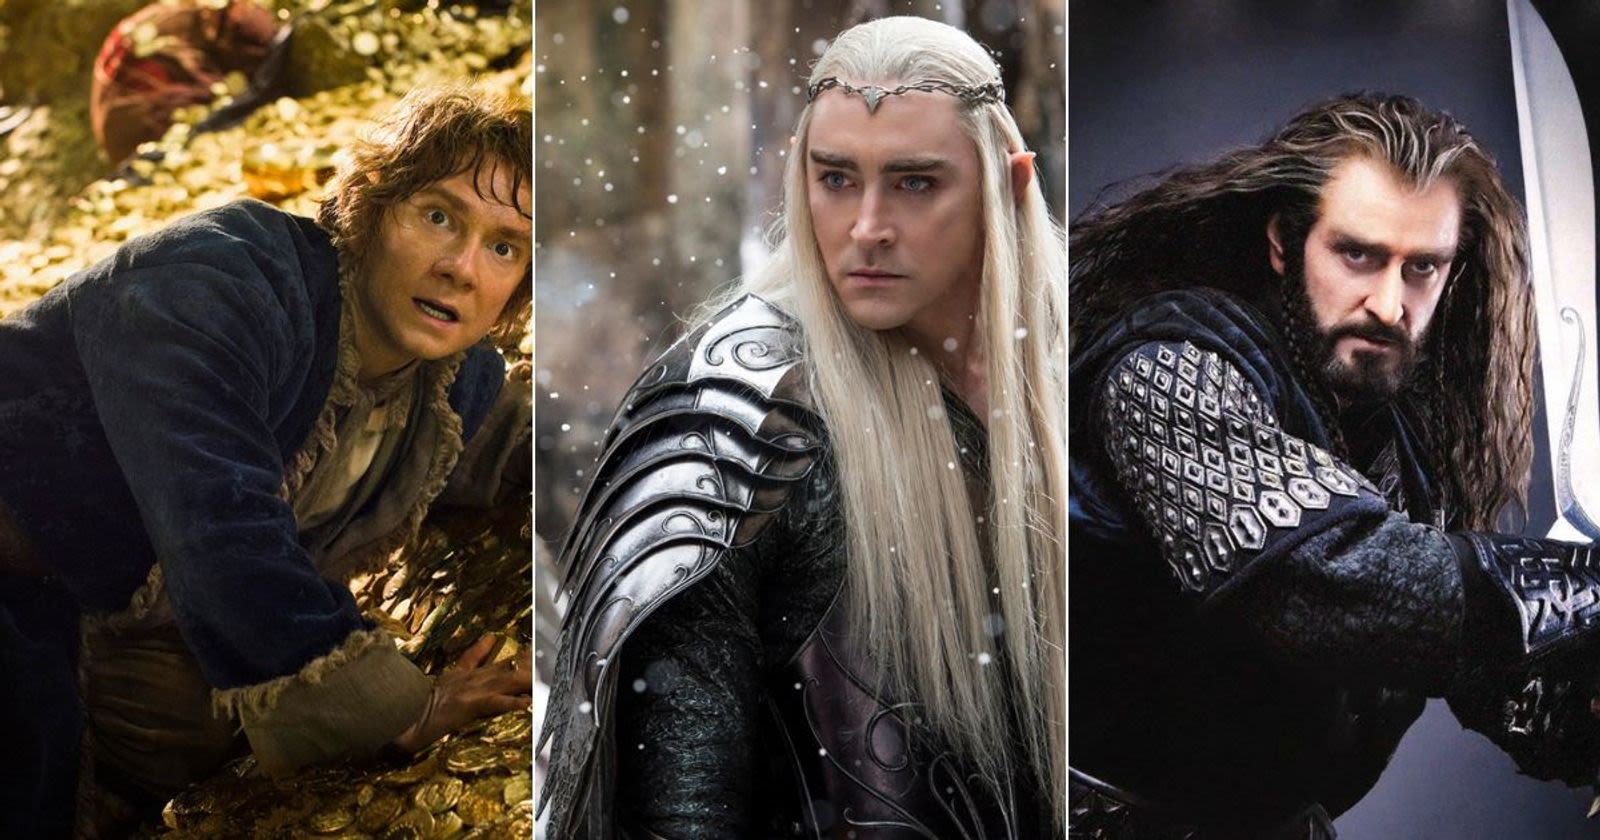 Hear Us Out: 7 Hottest Characters in The Hobbit Trilogy